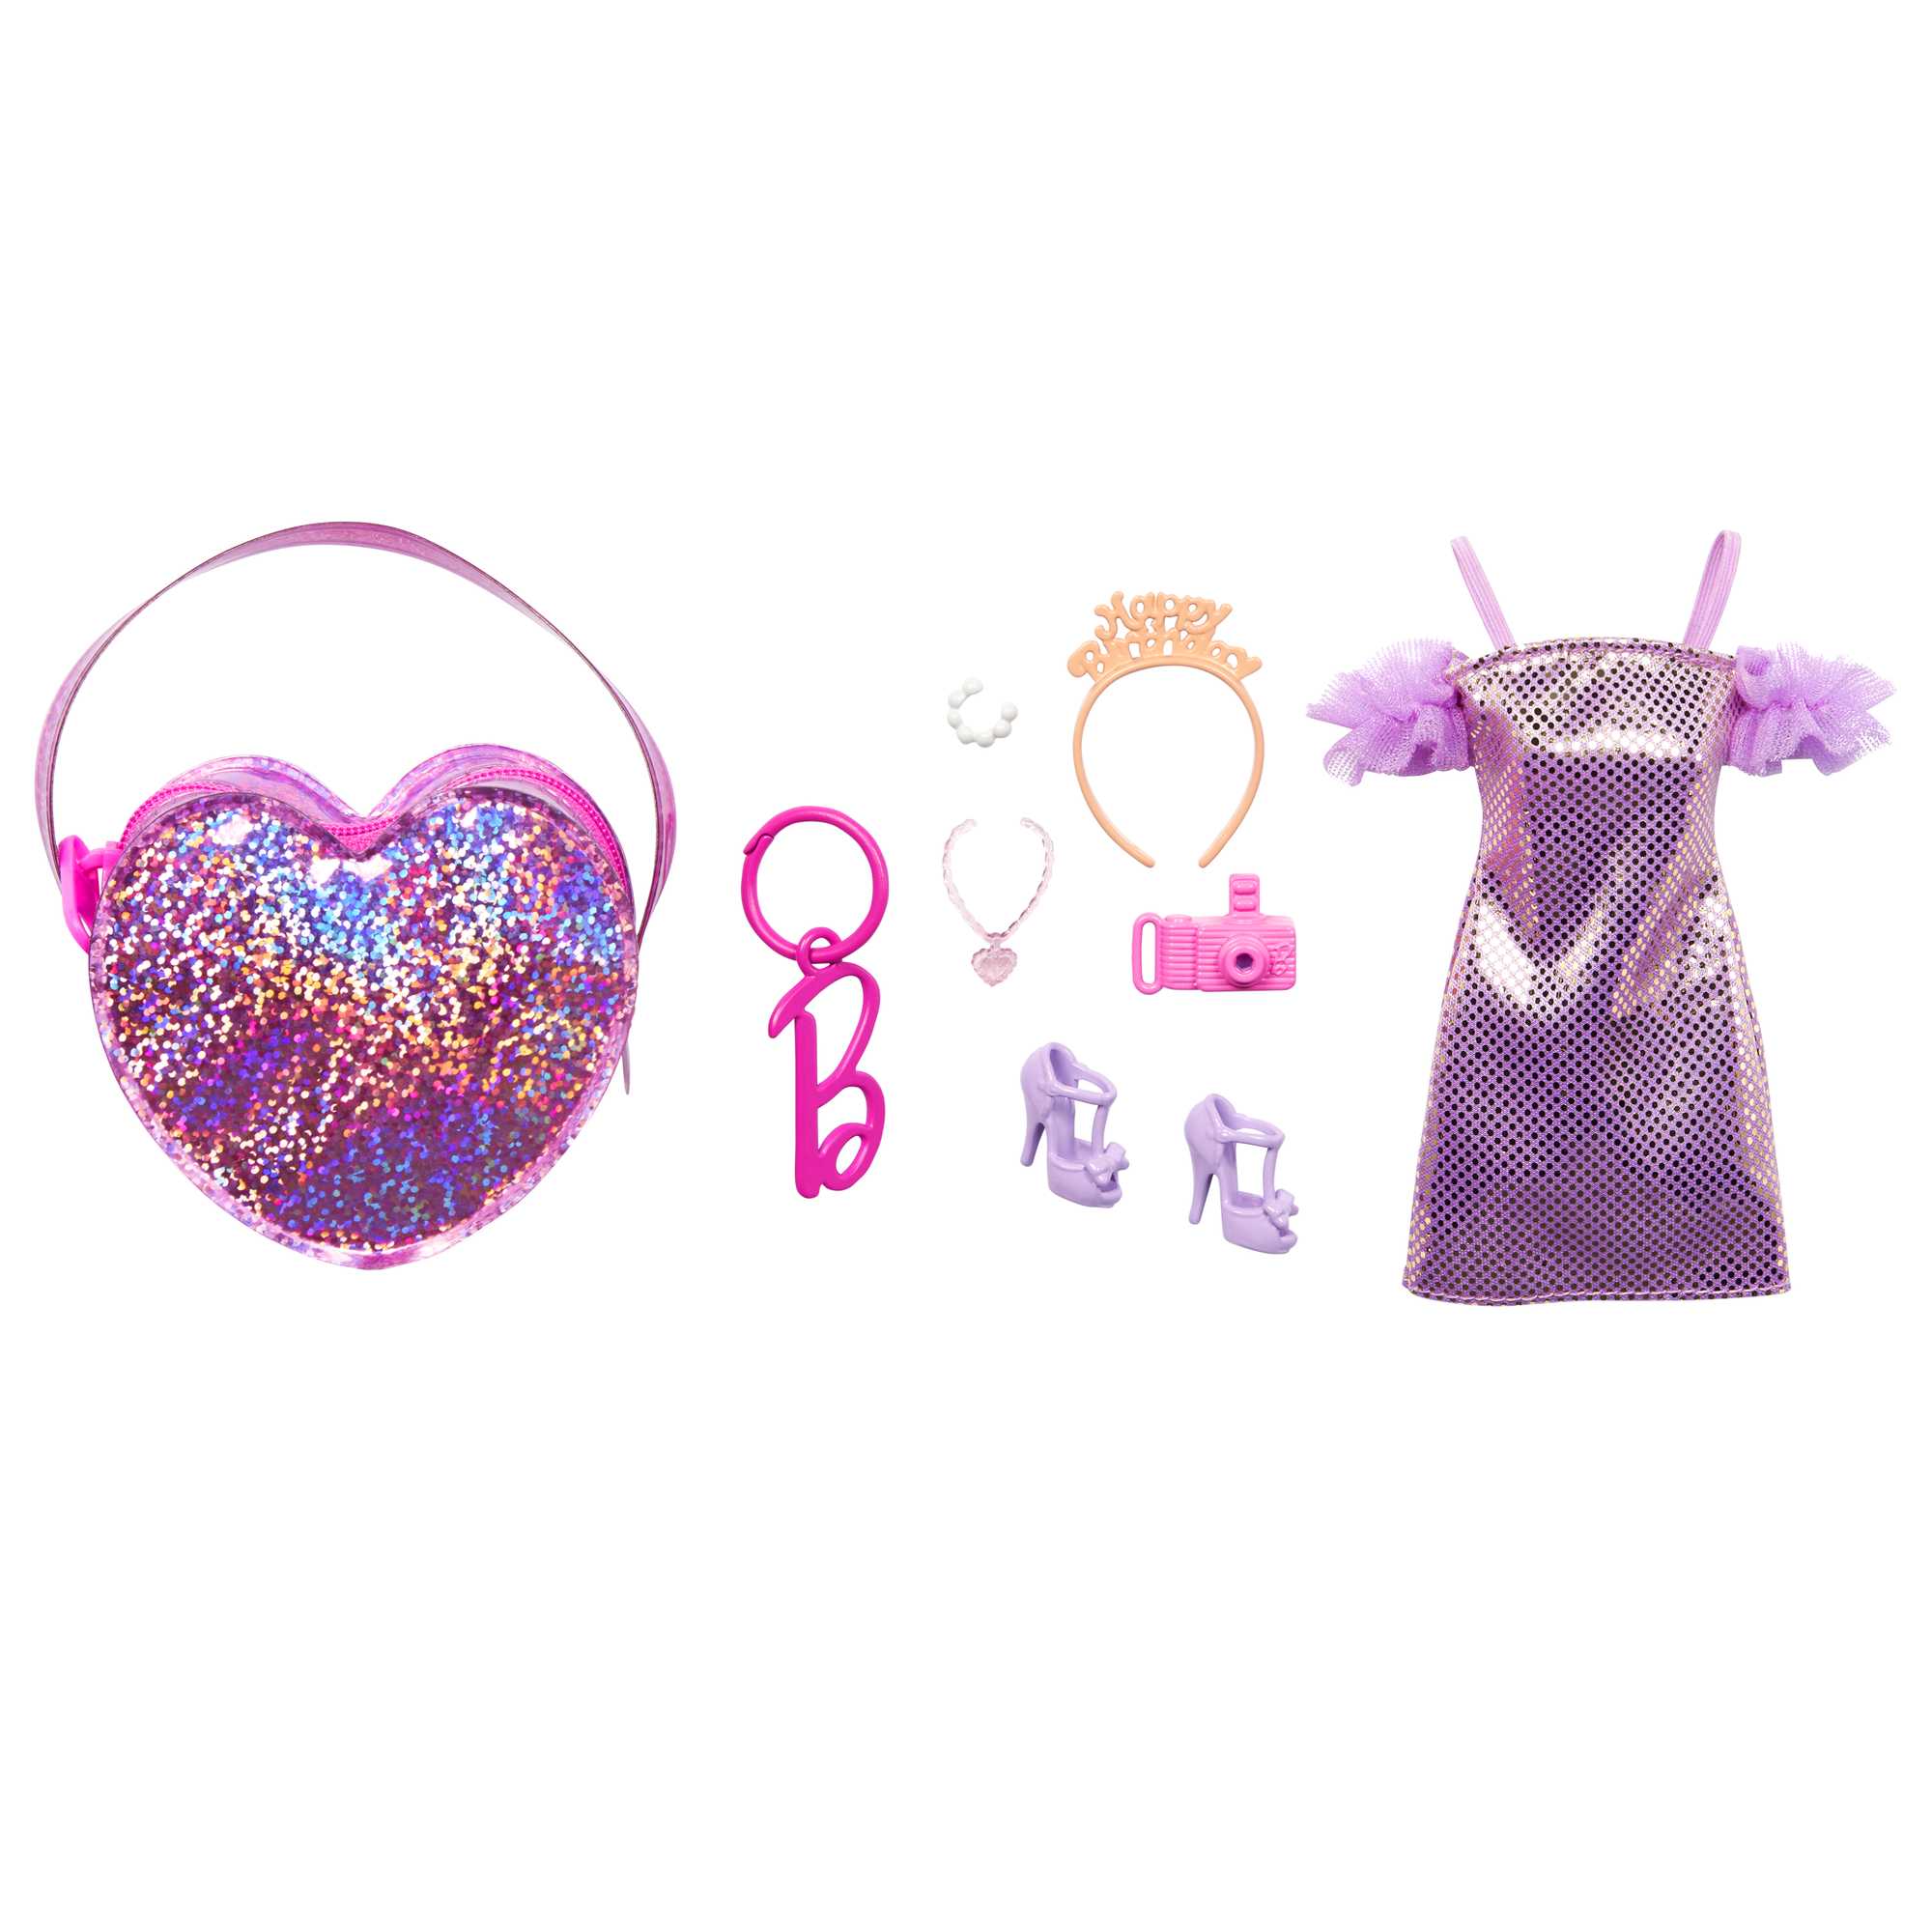 Barbie Clothes, Deluxe Birthday Bag & Accessories